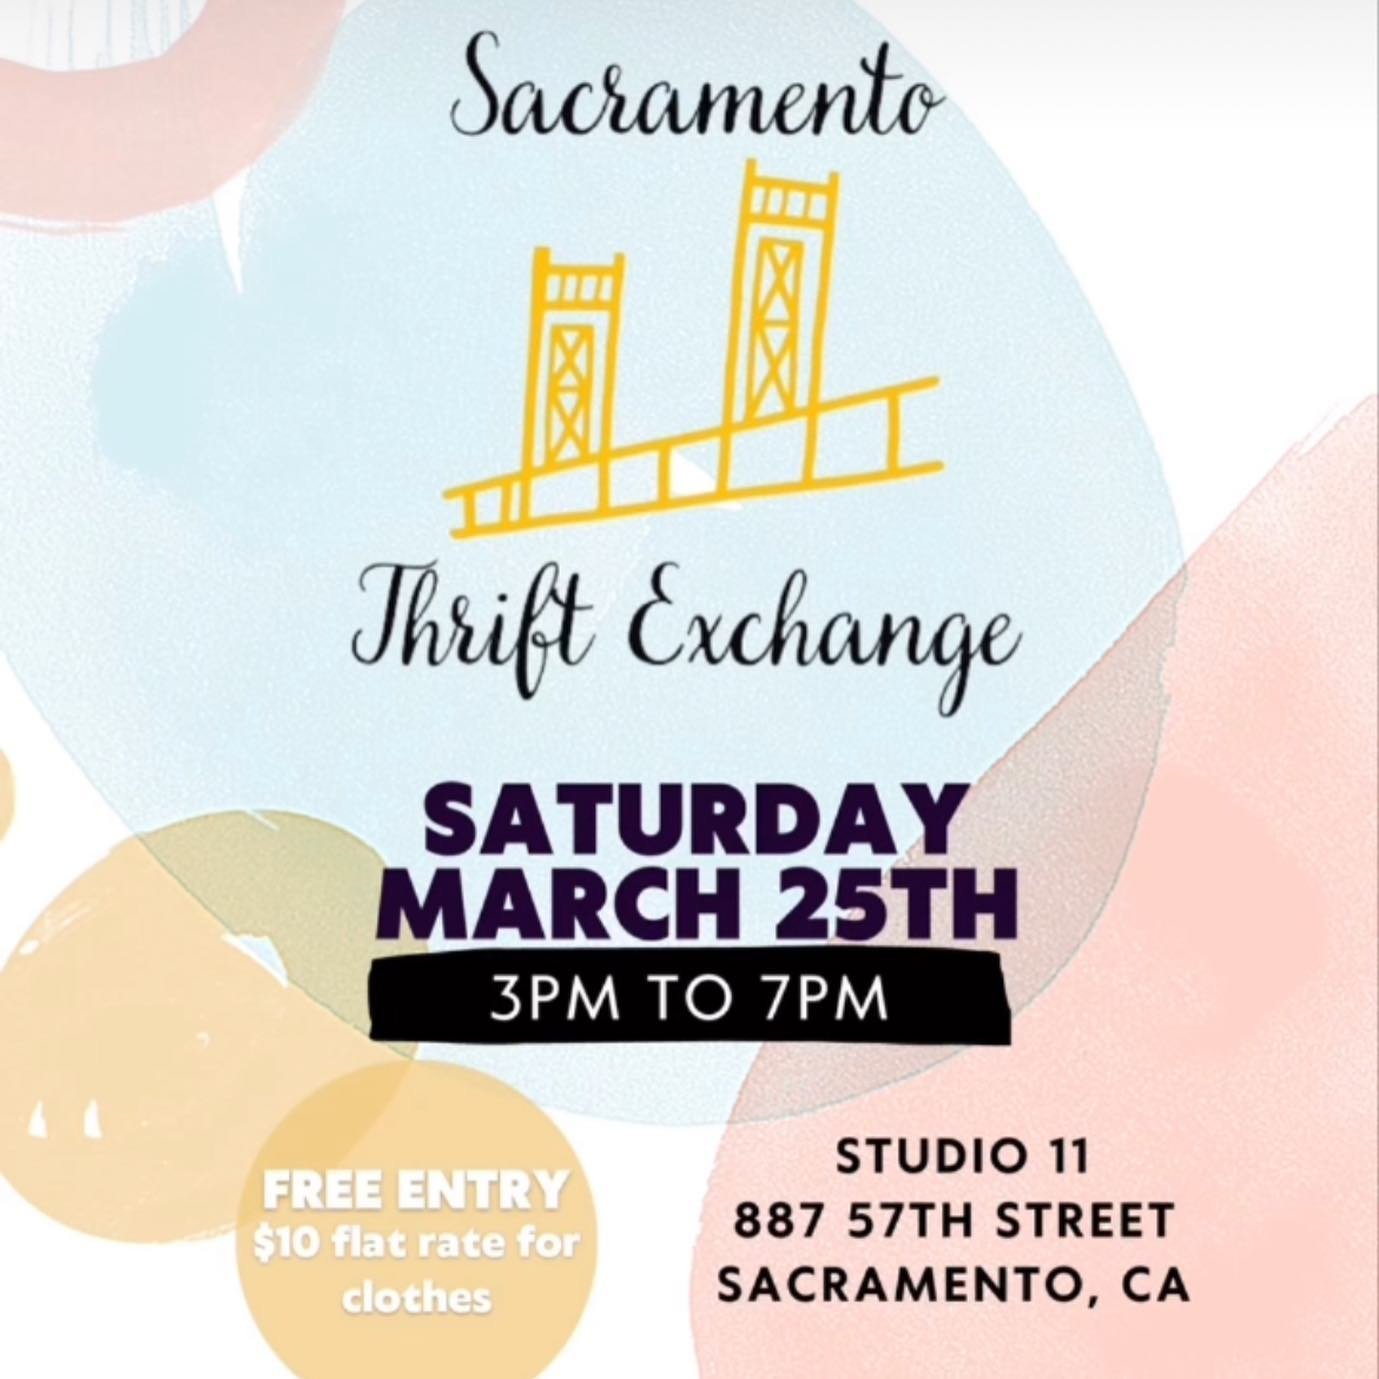 @sacramentothriftexchange is hosting another event this Saturday at @studio11sacramento!! Here&rsquo;s how it works 👇🏽

👉🏽 DONATE: Clean out your closet and bring your unwanted, gently used clothes to Studio 11 on Friday evening or during the eve